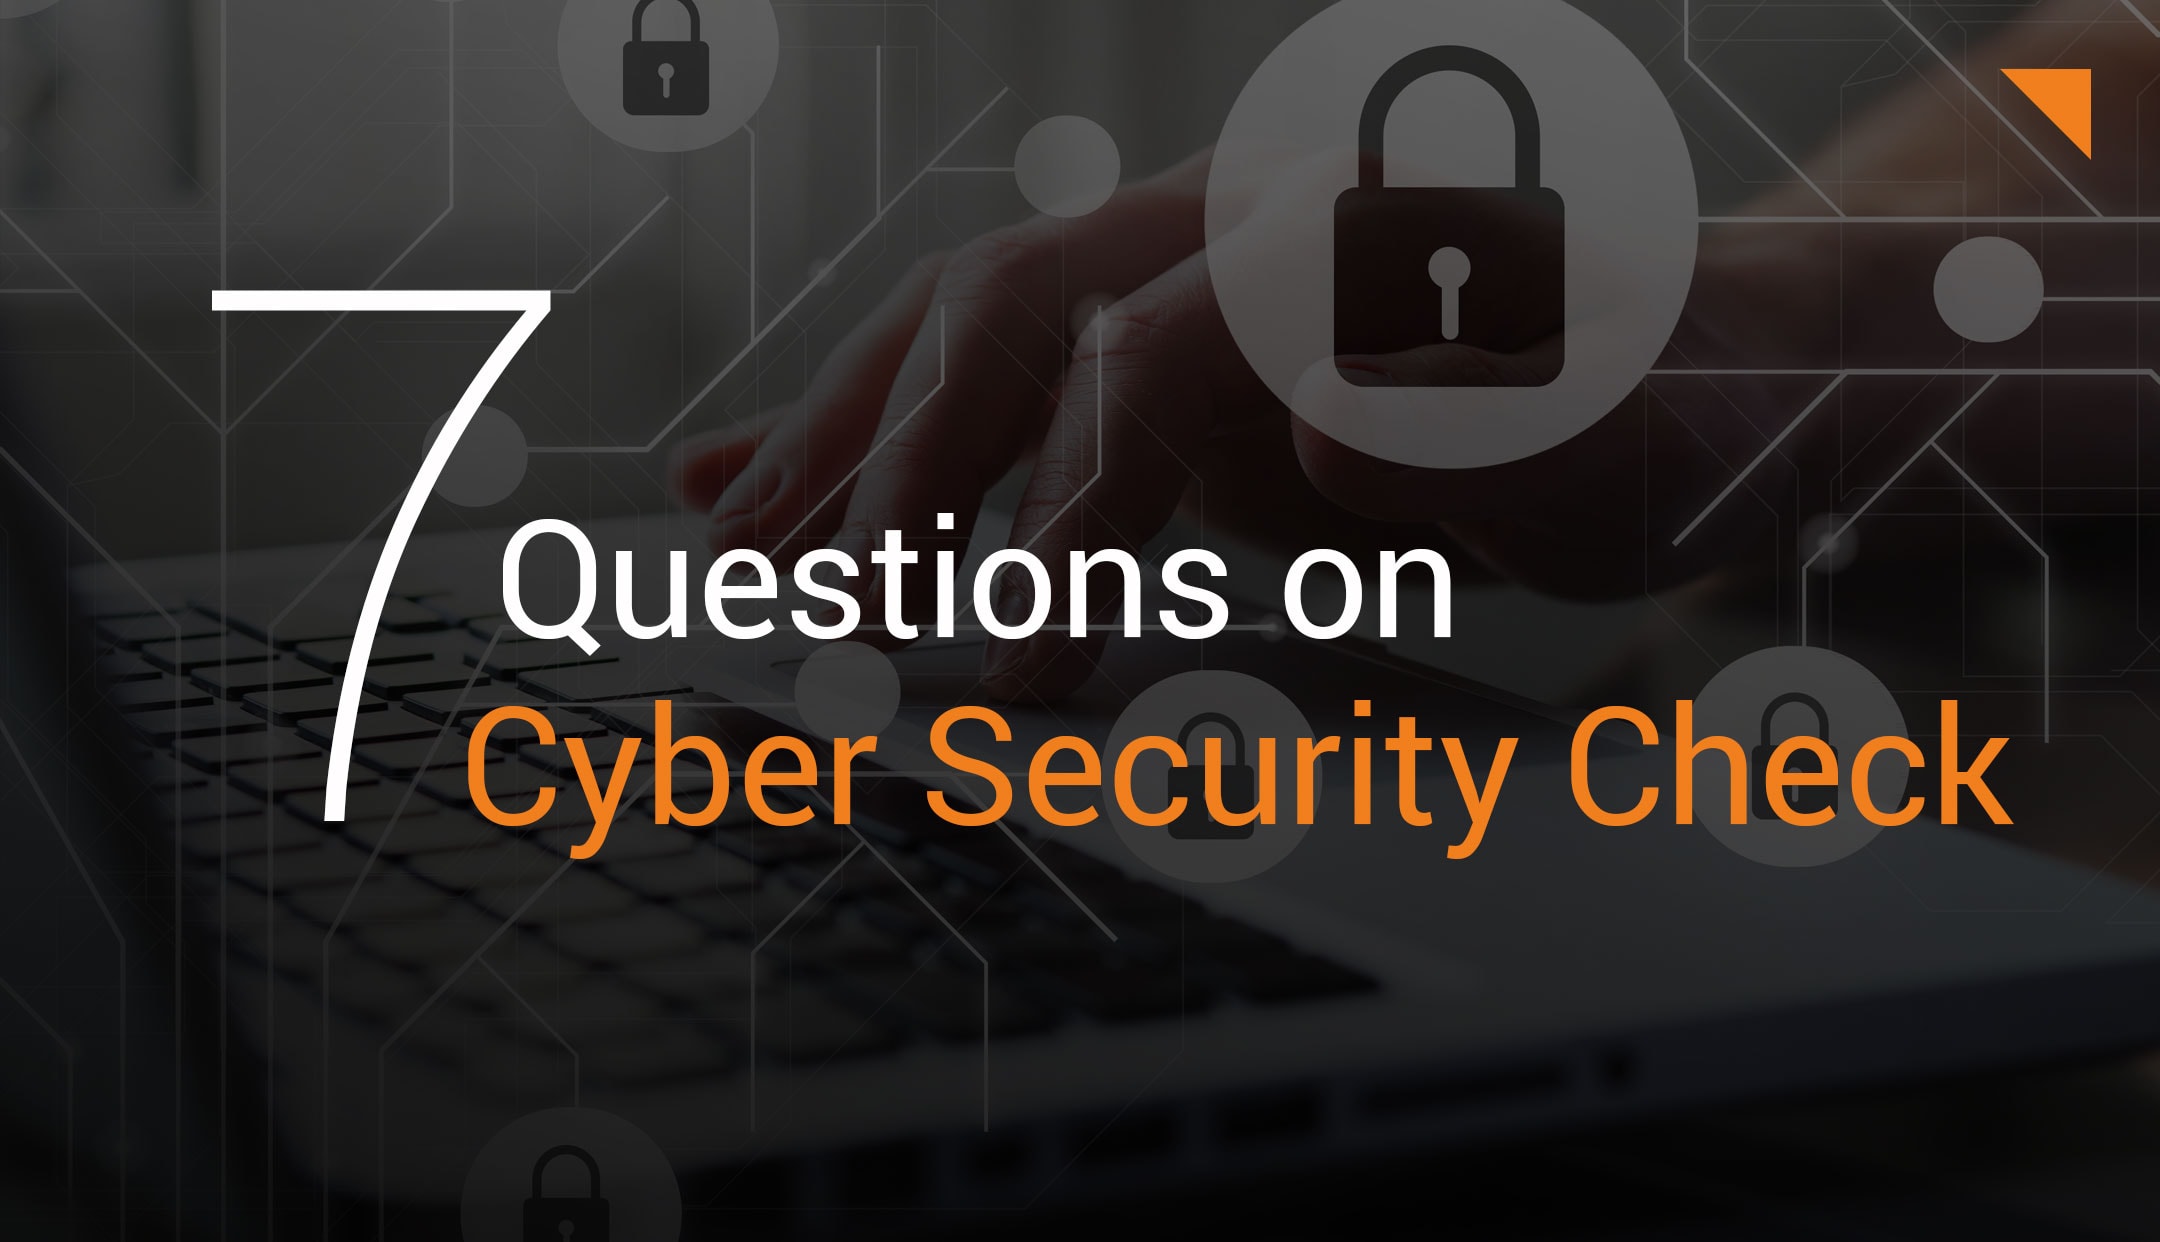 Cyber Security Check: The 7 most important questions